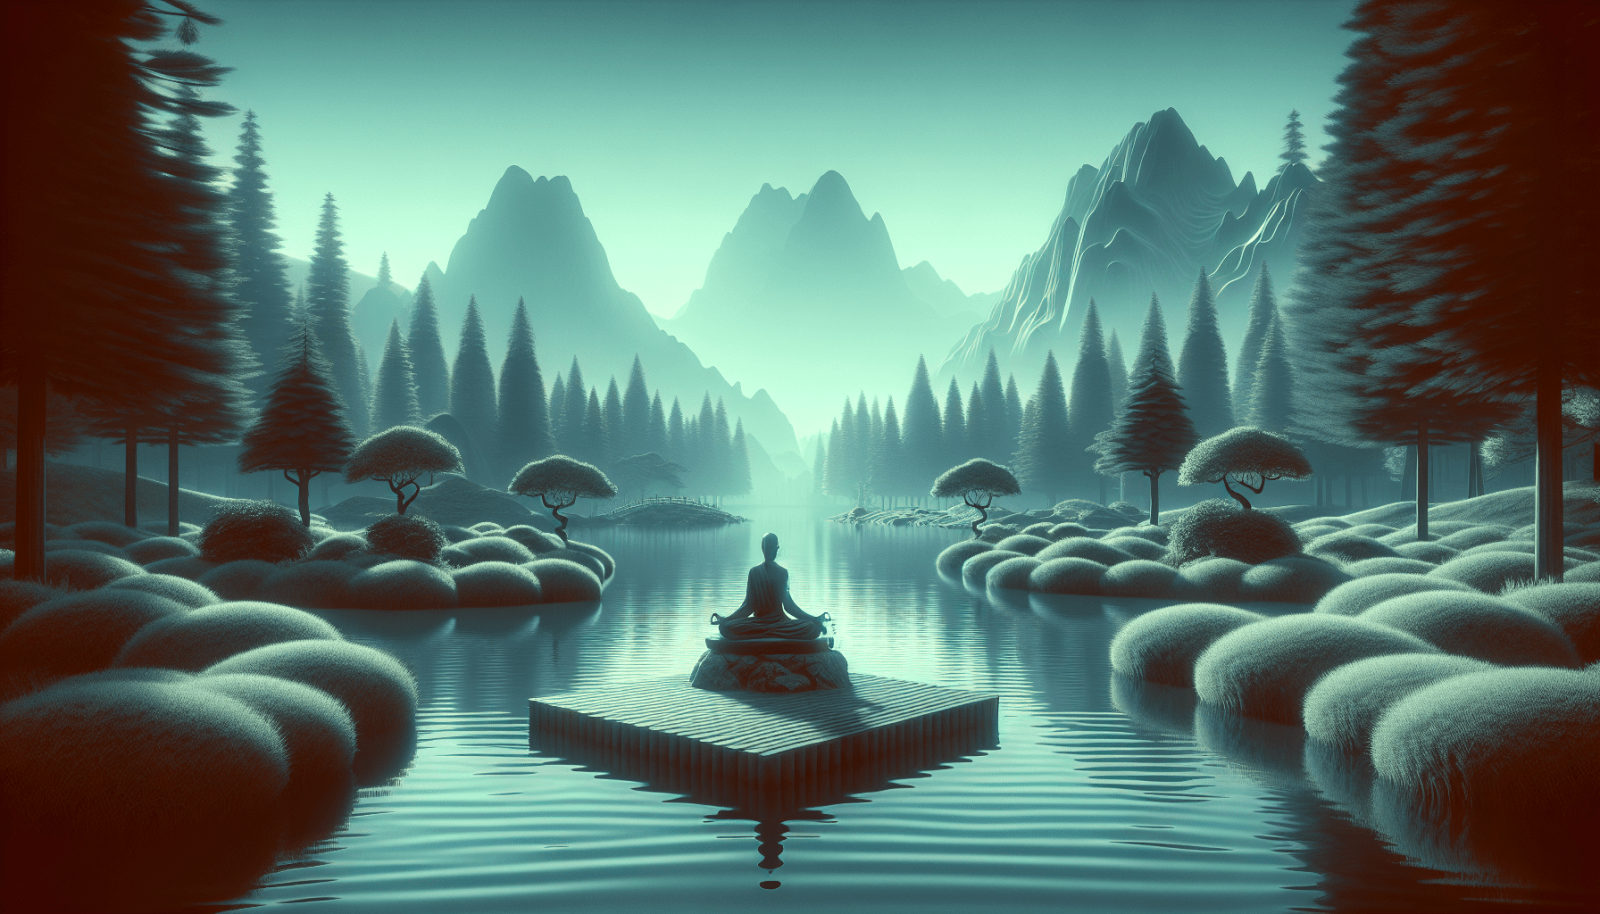 A serene digital artwork of a person meditating on a floating platform in the center of a calm lake, surrounded by symmetrical, manicured trees with rolling hills and towering mountain peaks in the backdrop, all enveloped in a blue, misty atmosphere.